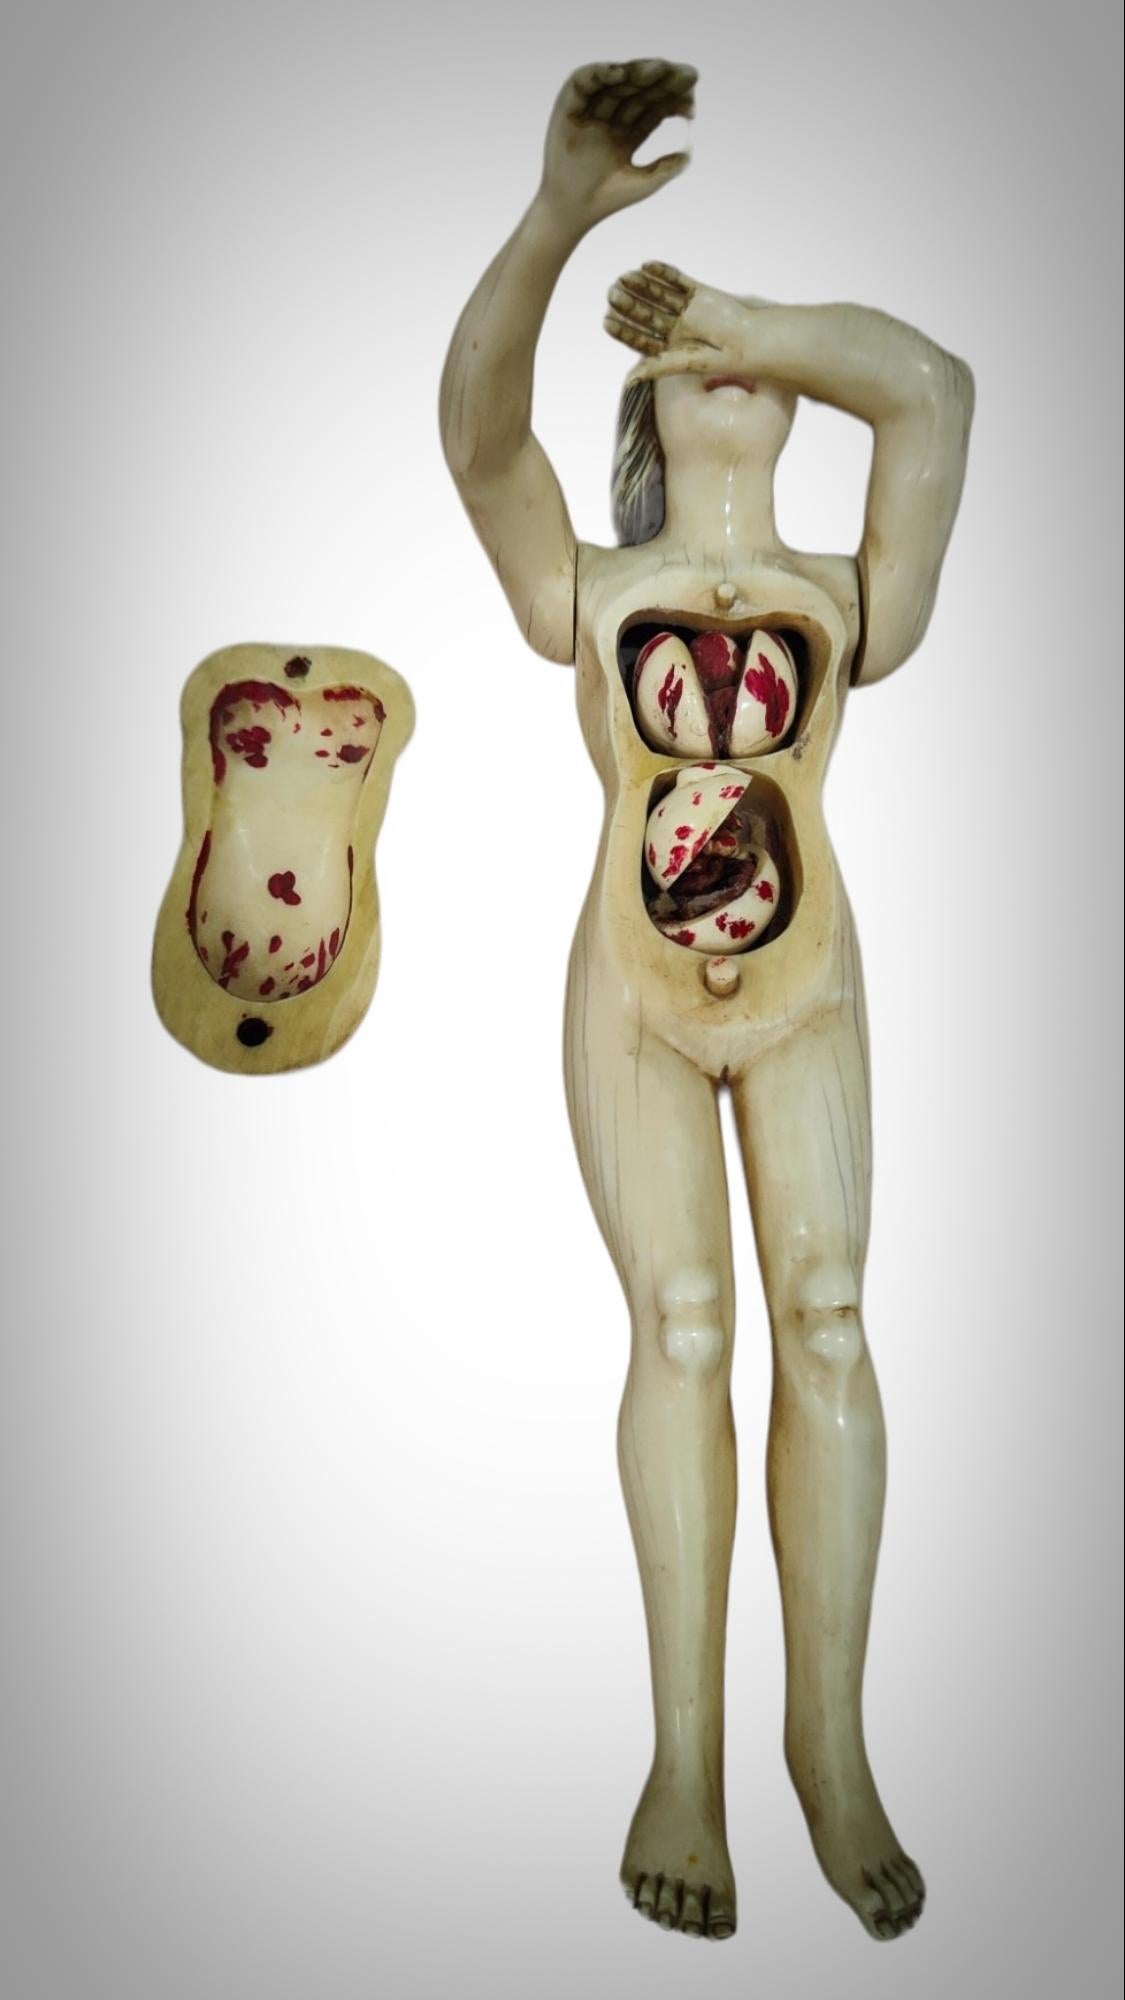 A GERMAN  ANATOMICAL MODEL OF a PREGNANT WOMAN STEPHEN ZICK For Sale 1